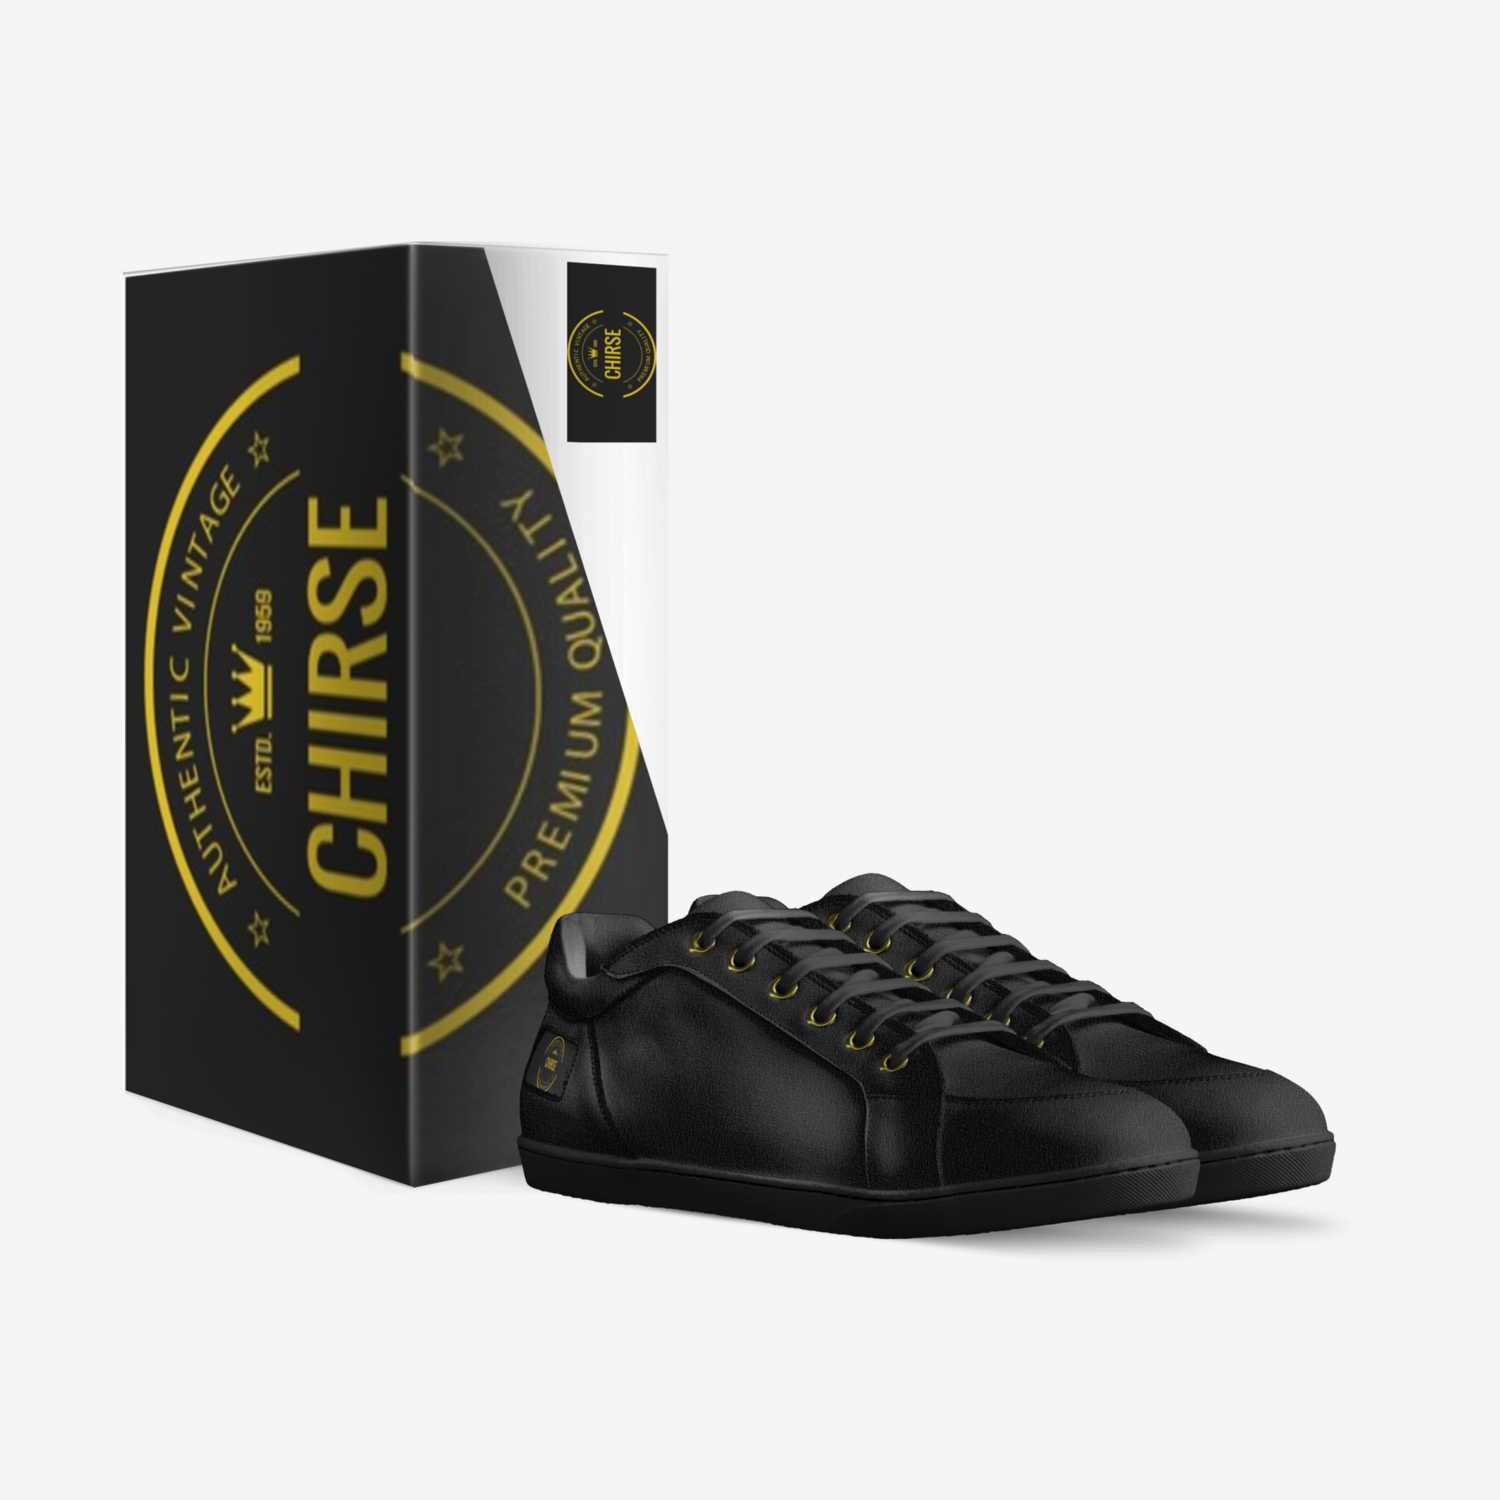 Chirse custom made in Italy shoes by Harold Chirse | Box view